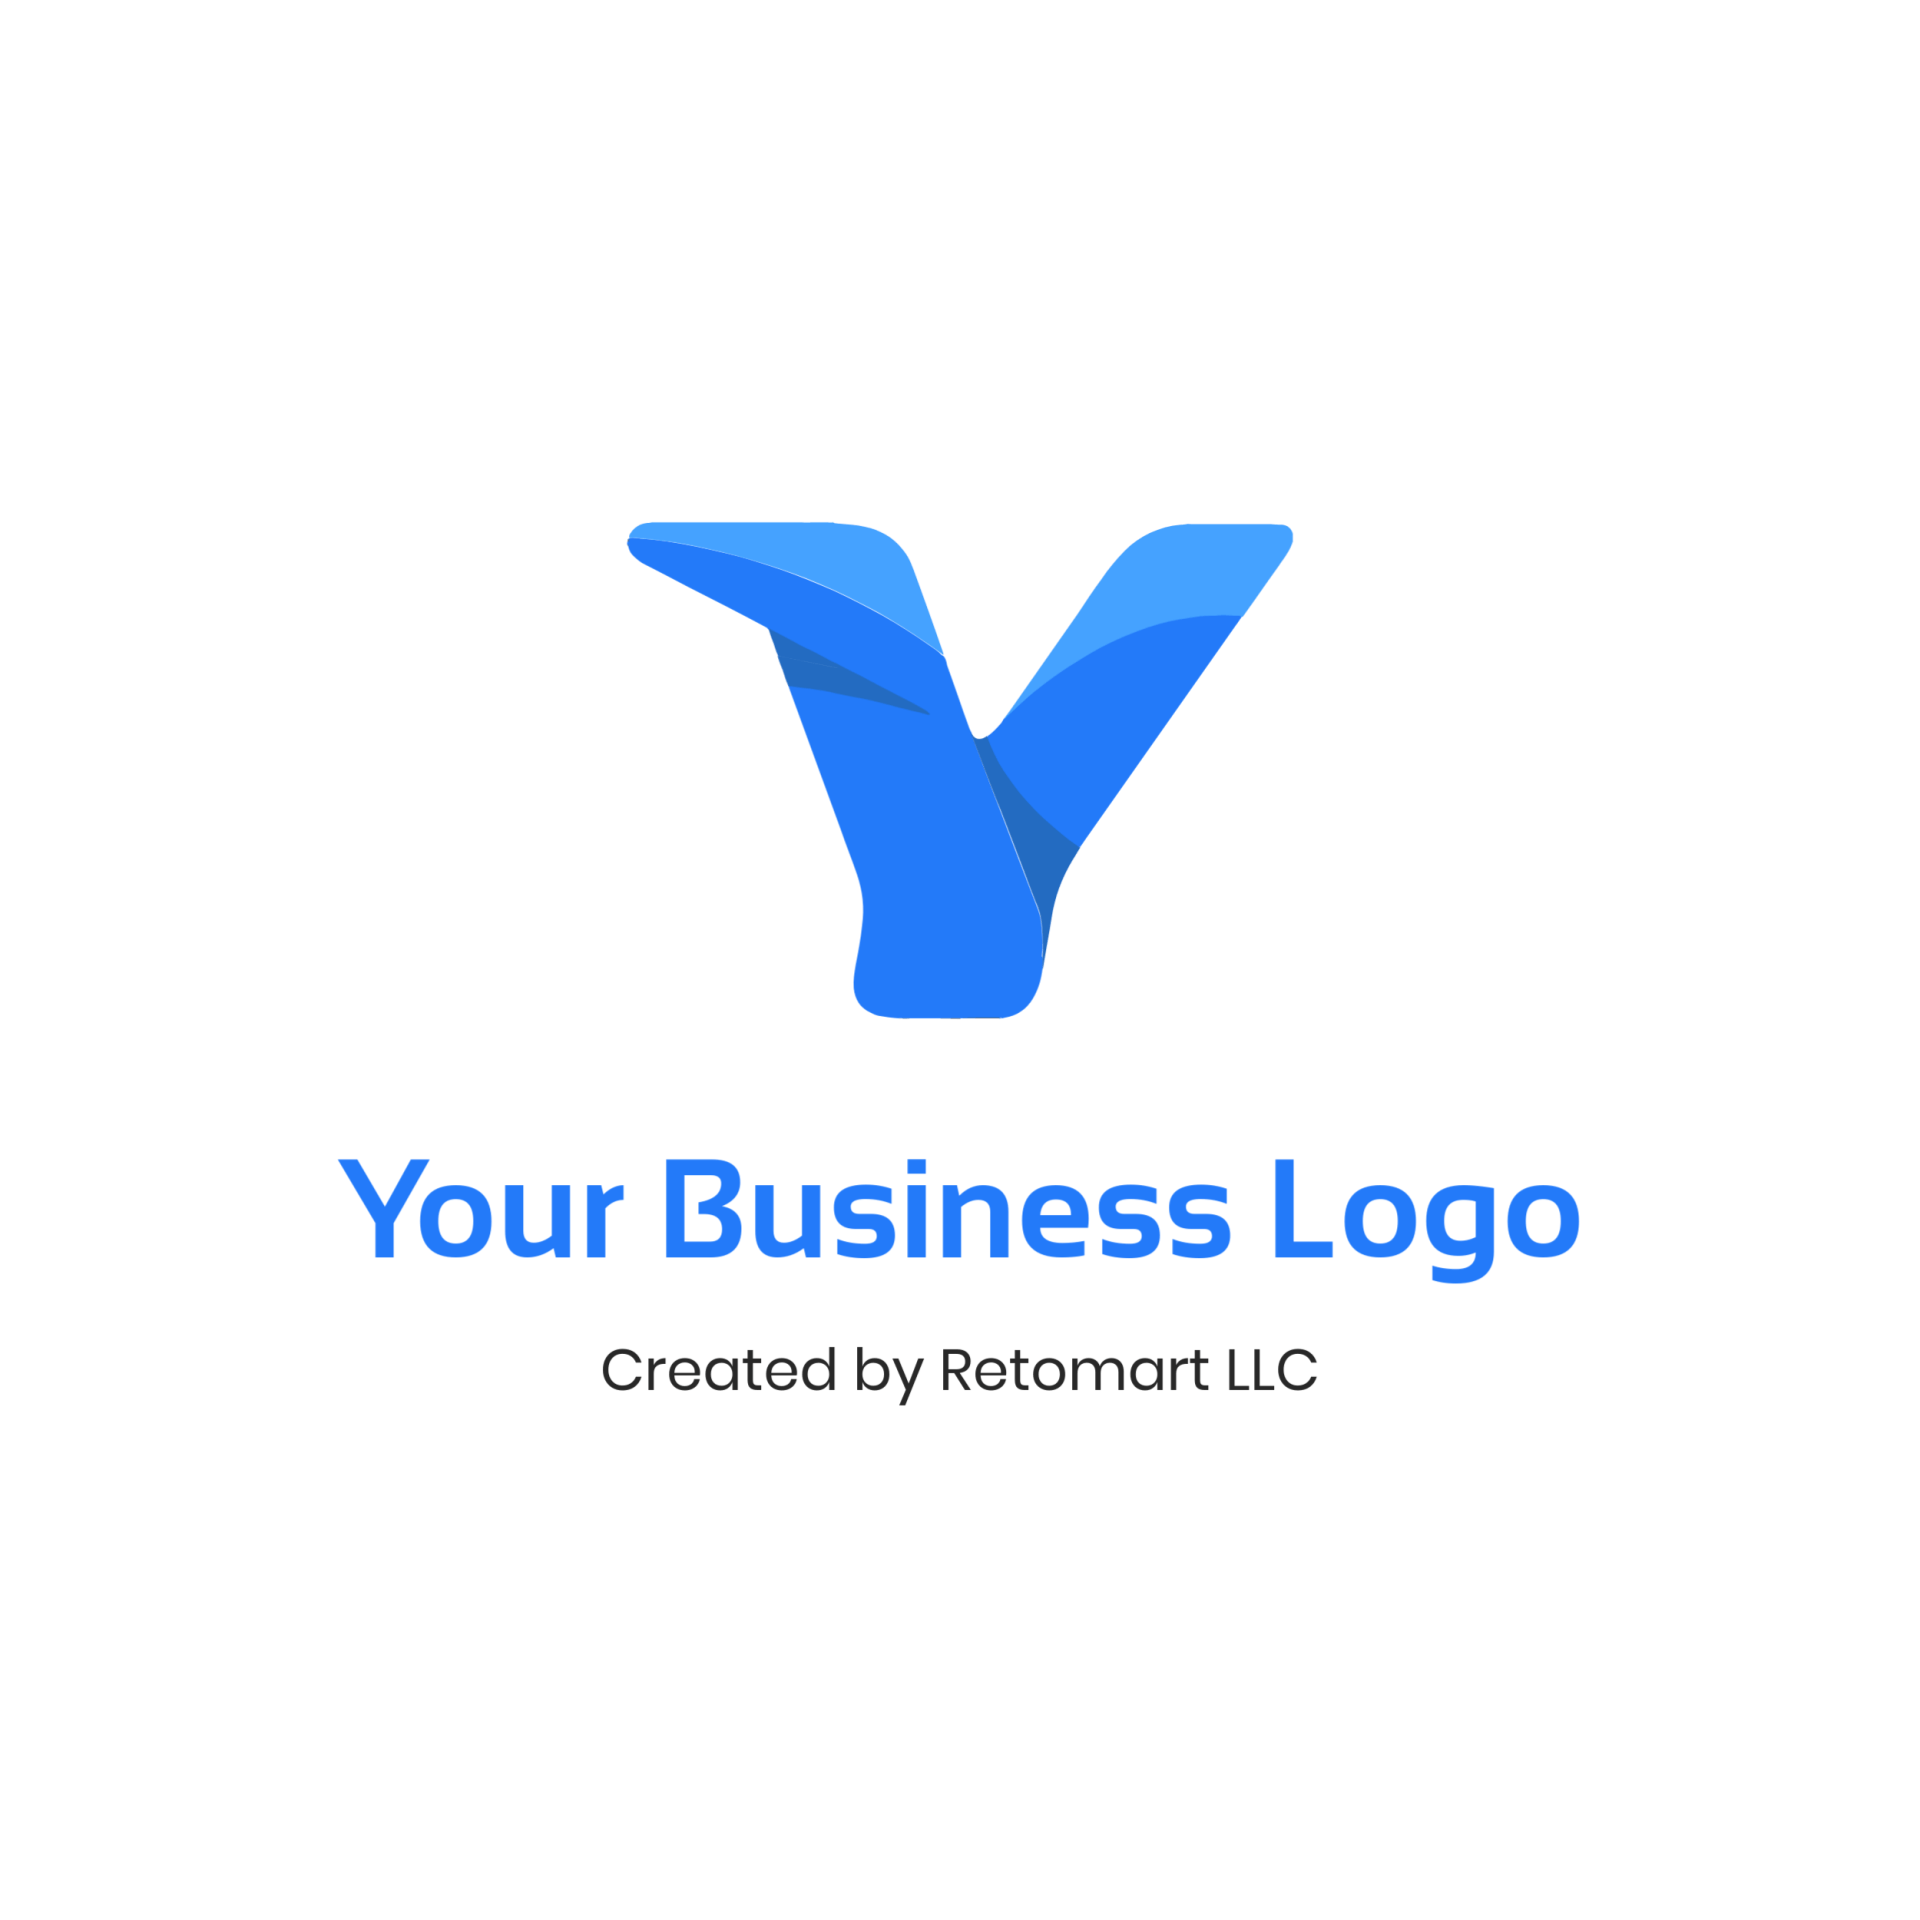 This is what your logo can look like with a letter of the alphabet as a symbol.